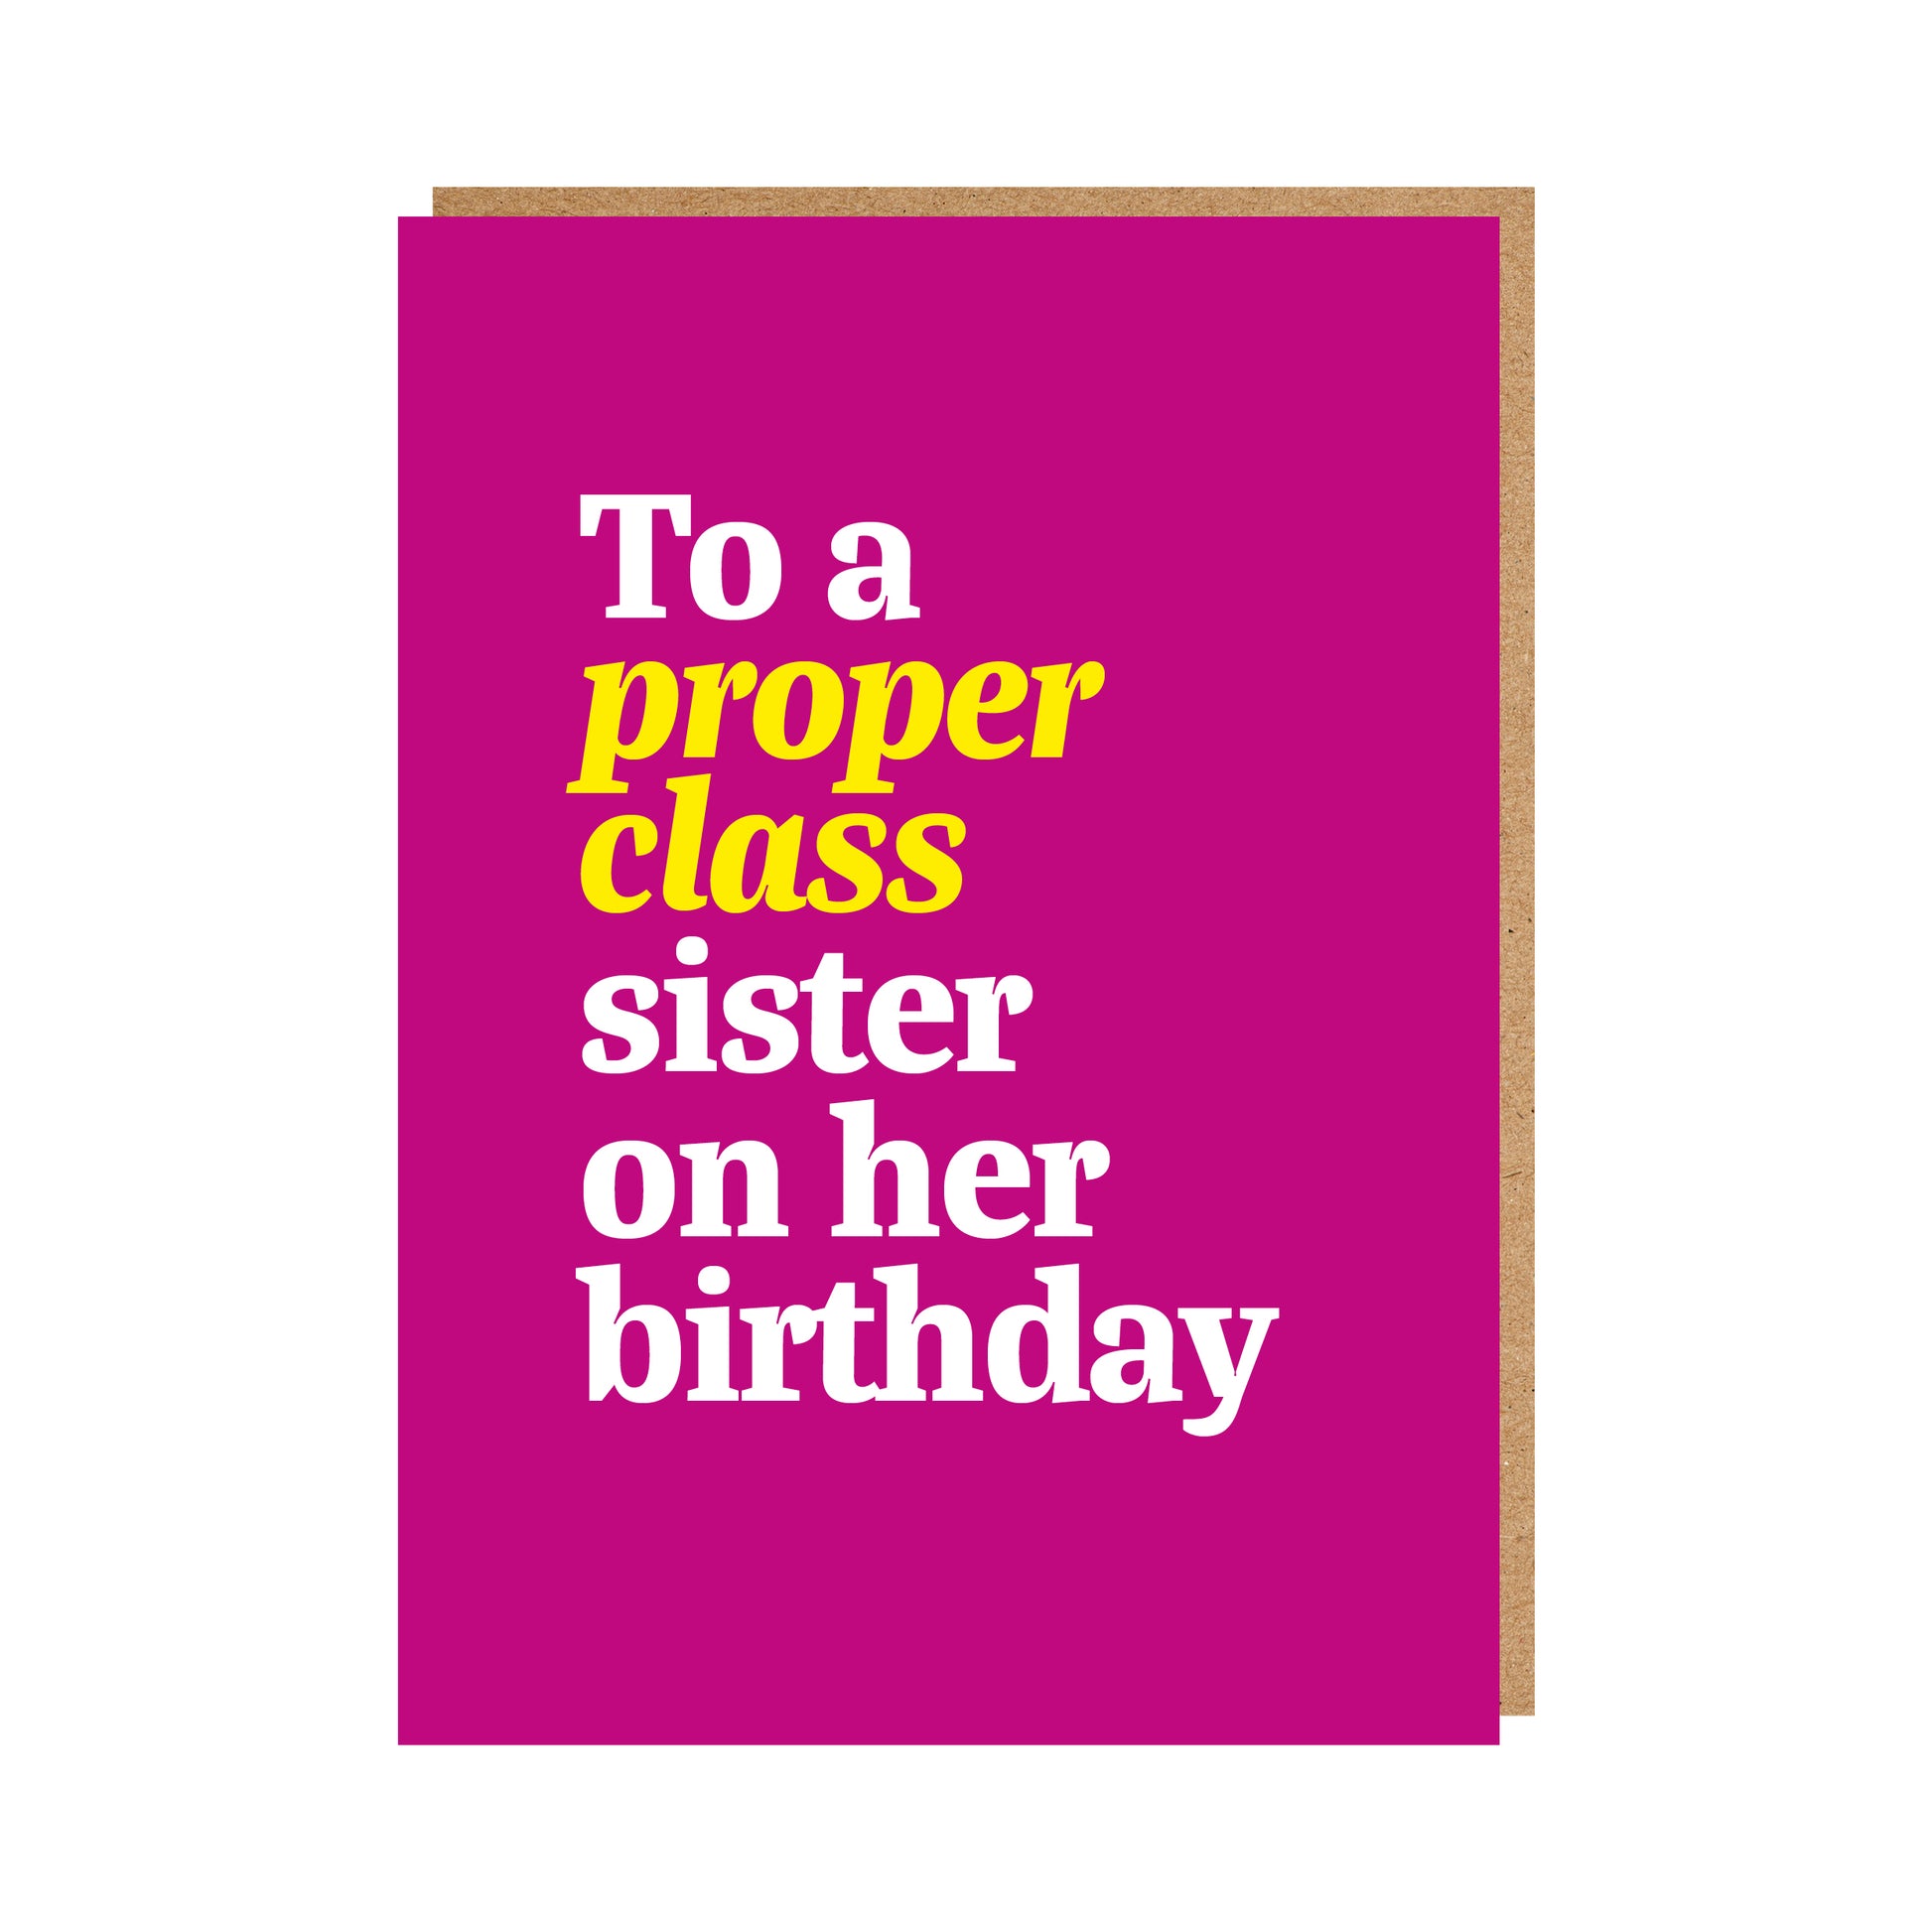 Birthday Card reading "To a proper class sister on her birthday".